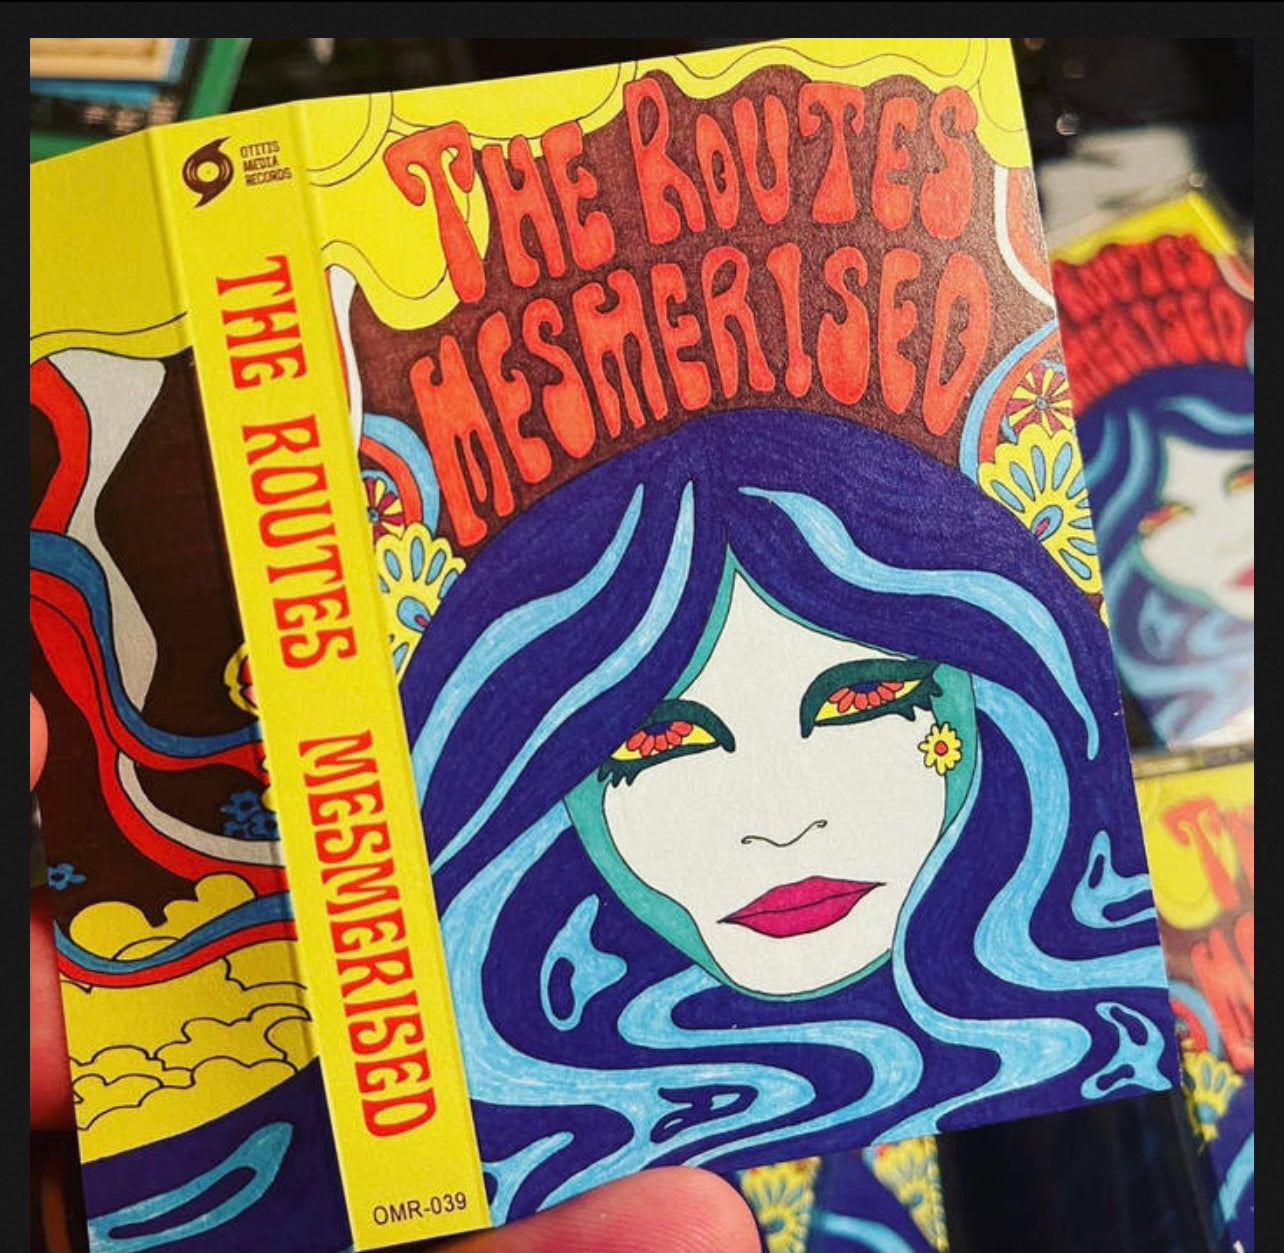 OMR-039 THE ROUTES “Mesmerised” CASSETTE TAPES